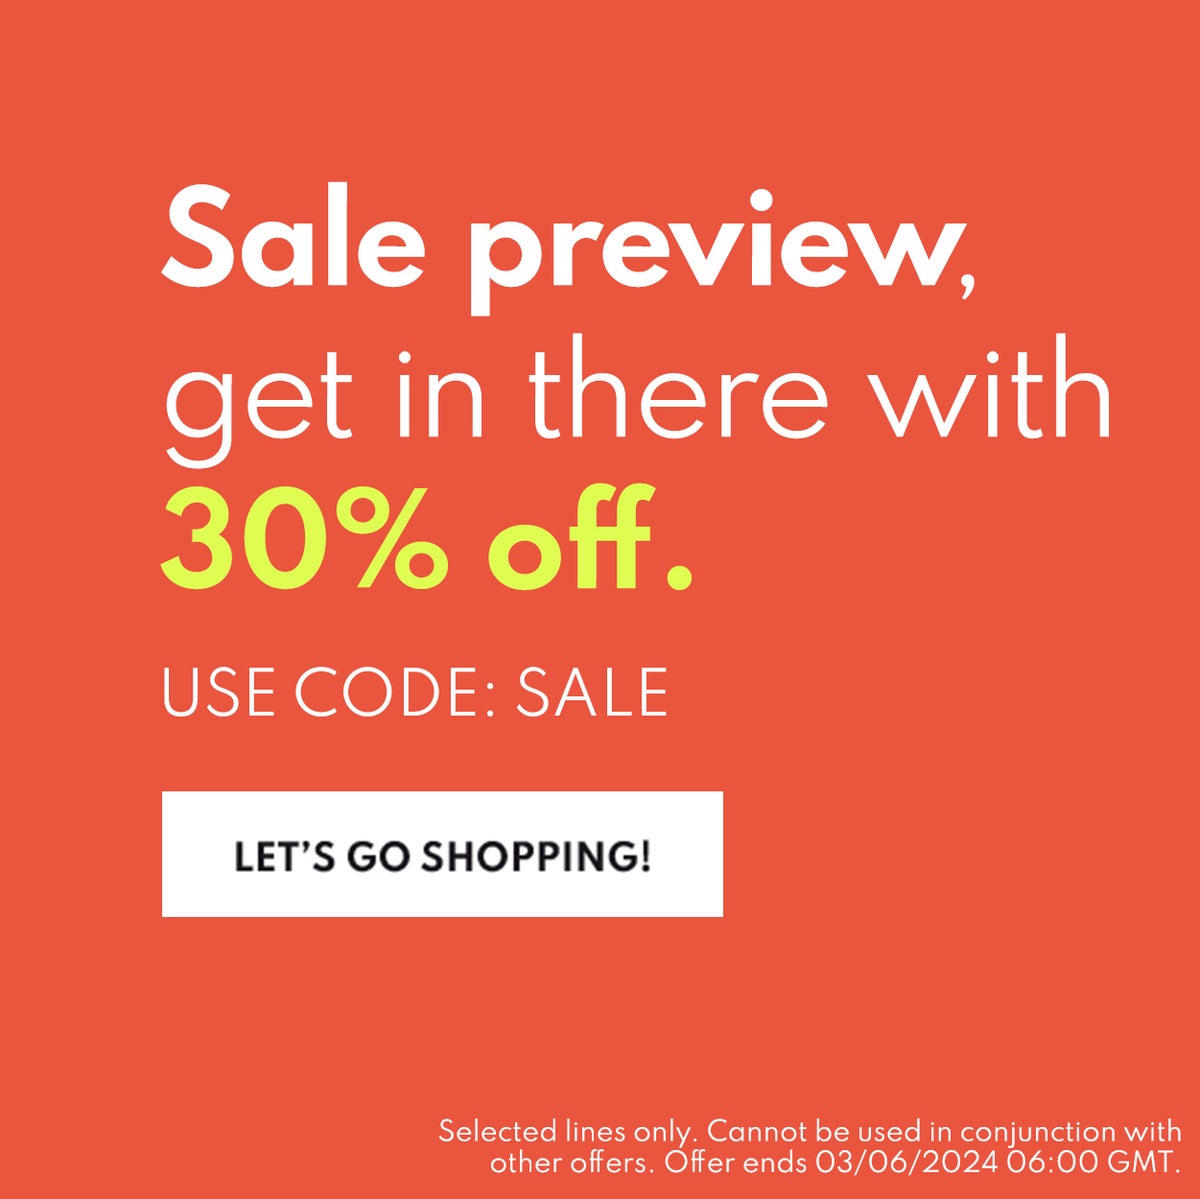 Sale Preview, get in there with 30% pff. Use code: SALE Let's go shopping.  Selected lines only. Cannot be used in conjunction with other offers. Offer ends 03/06/2024 06:00am GMT